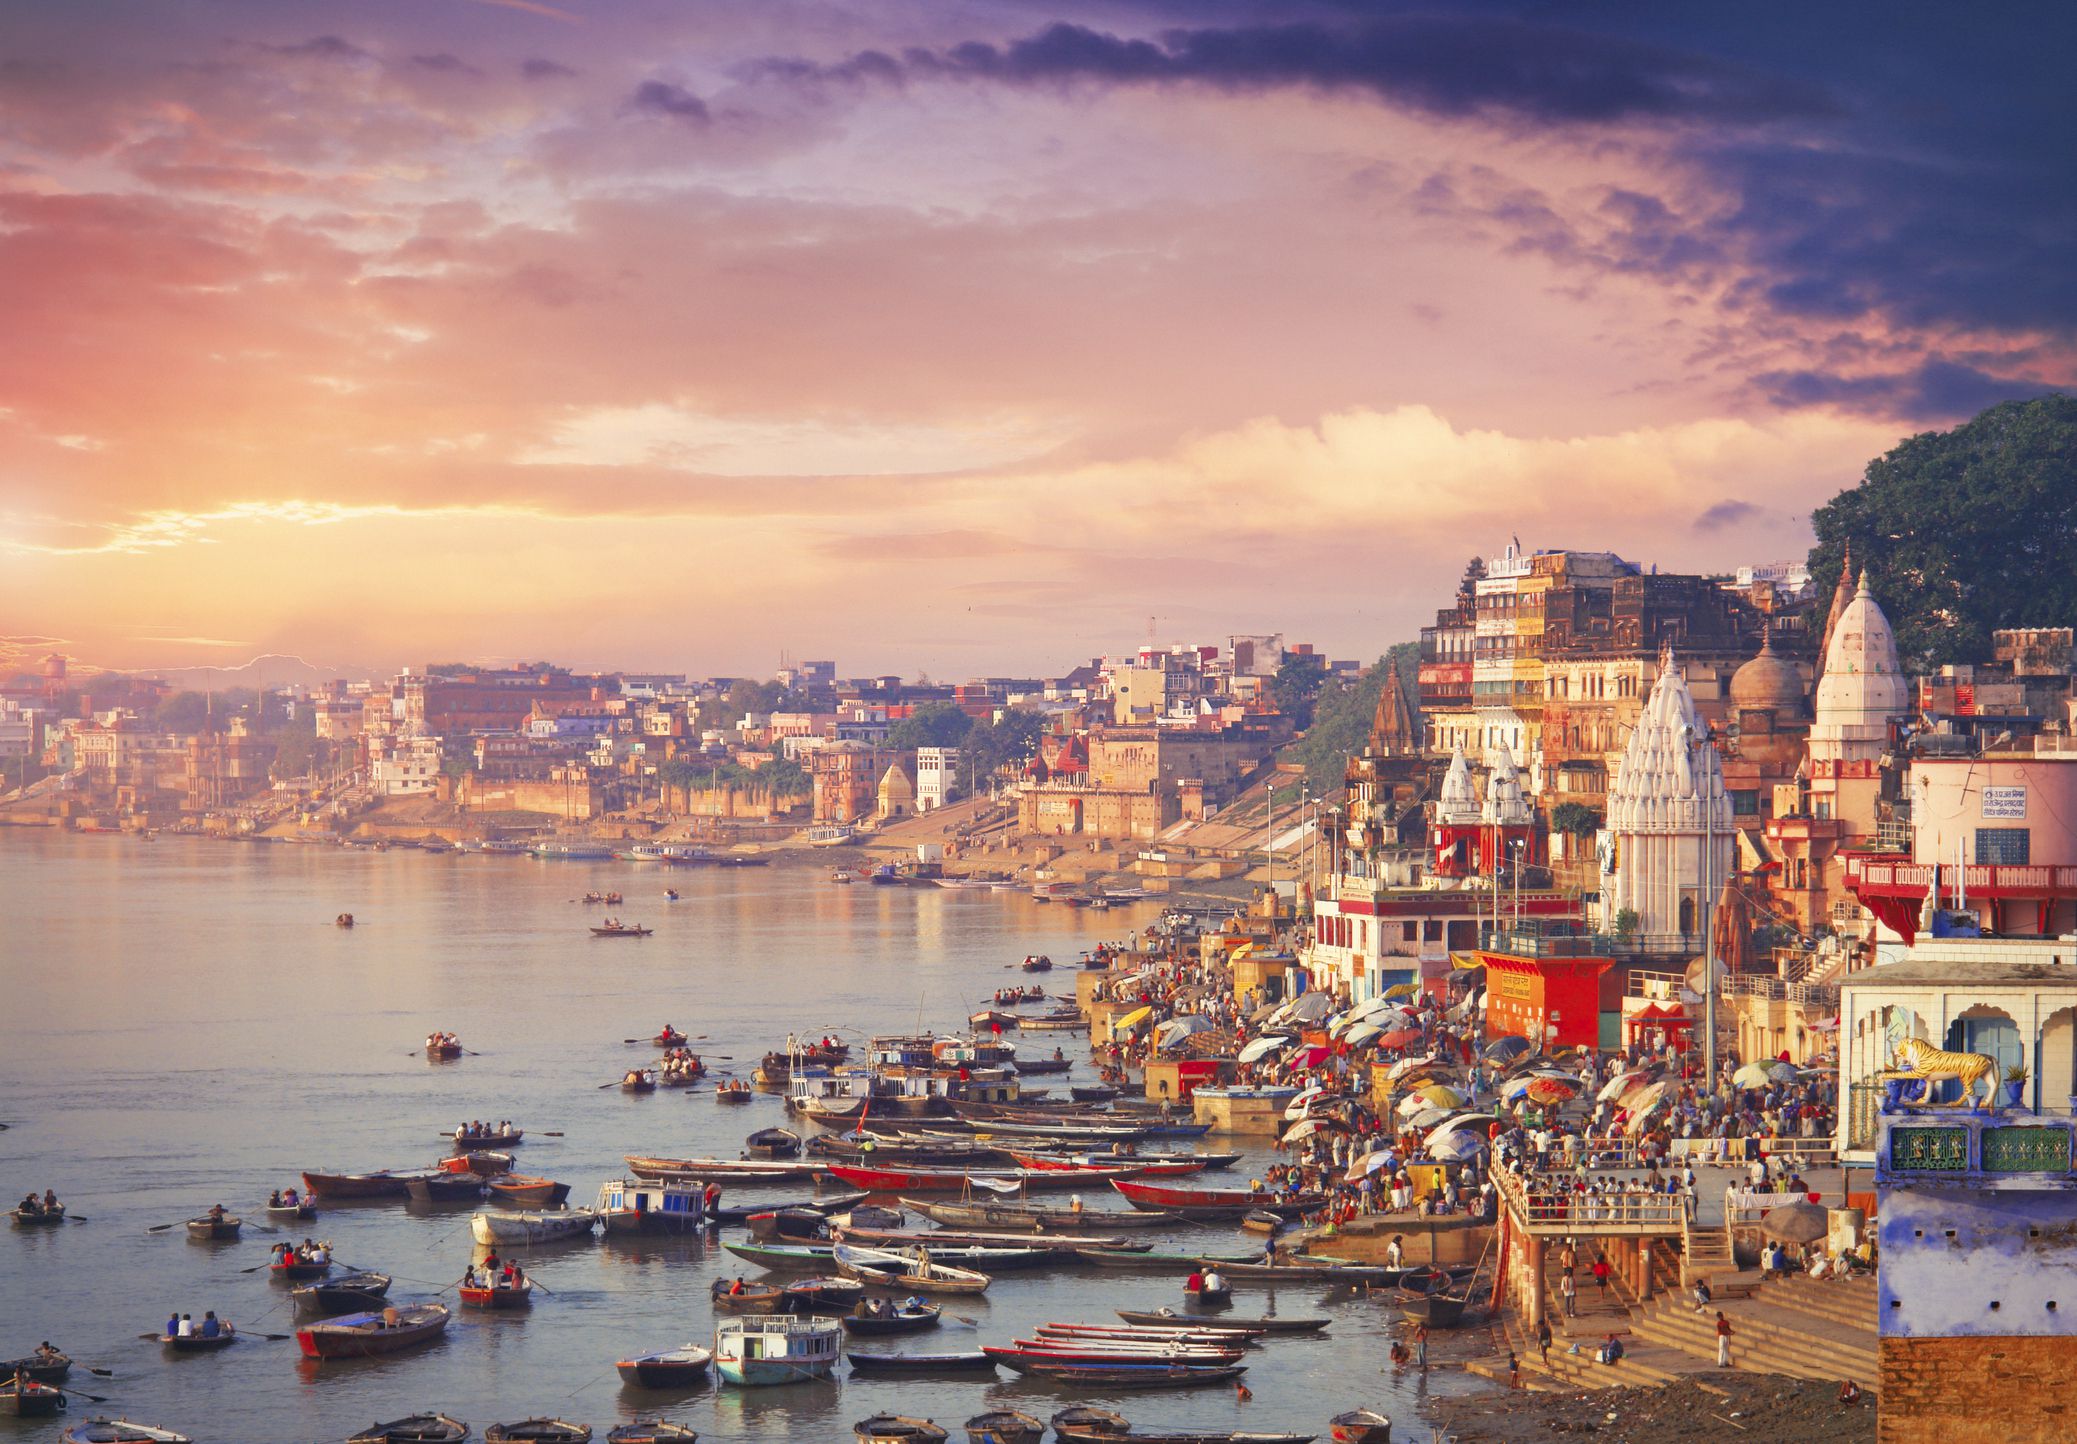 <p>Last but not least on our list of the world’s most incredible spiritual destinations is Varanasi in India. Settled over 4,000 years ago, Varanasi is thought to be the world’s oldest city.</p><p>The spiritual heart of India, Varanasi is a hub of Hindu devotion and spirituality. Pilgrims come to bathe in the Ganges, offer prayers, and even cremate their dead.</p><p>Buddhists believe this is where Buddha gave his first sermon, so it’s also a powerful place for the Buddhist religion.</p><p>As a visitor, it’s incredible to witness the aarti ceremony at night, where the sadhus show their devotion by lifting flaming lamps and swinging incense in a powerful ritual.</p>